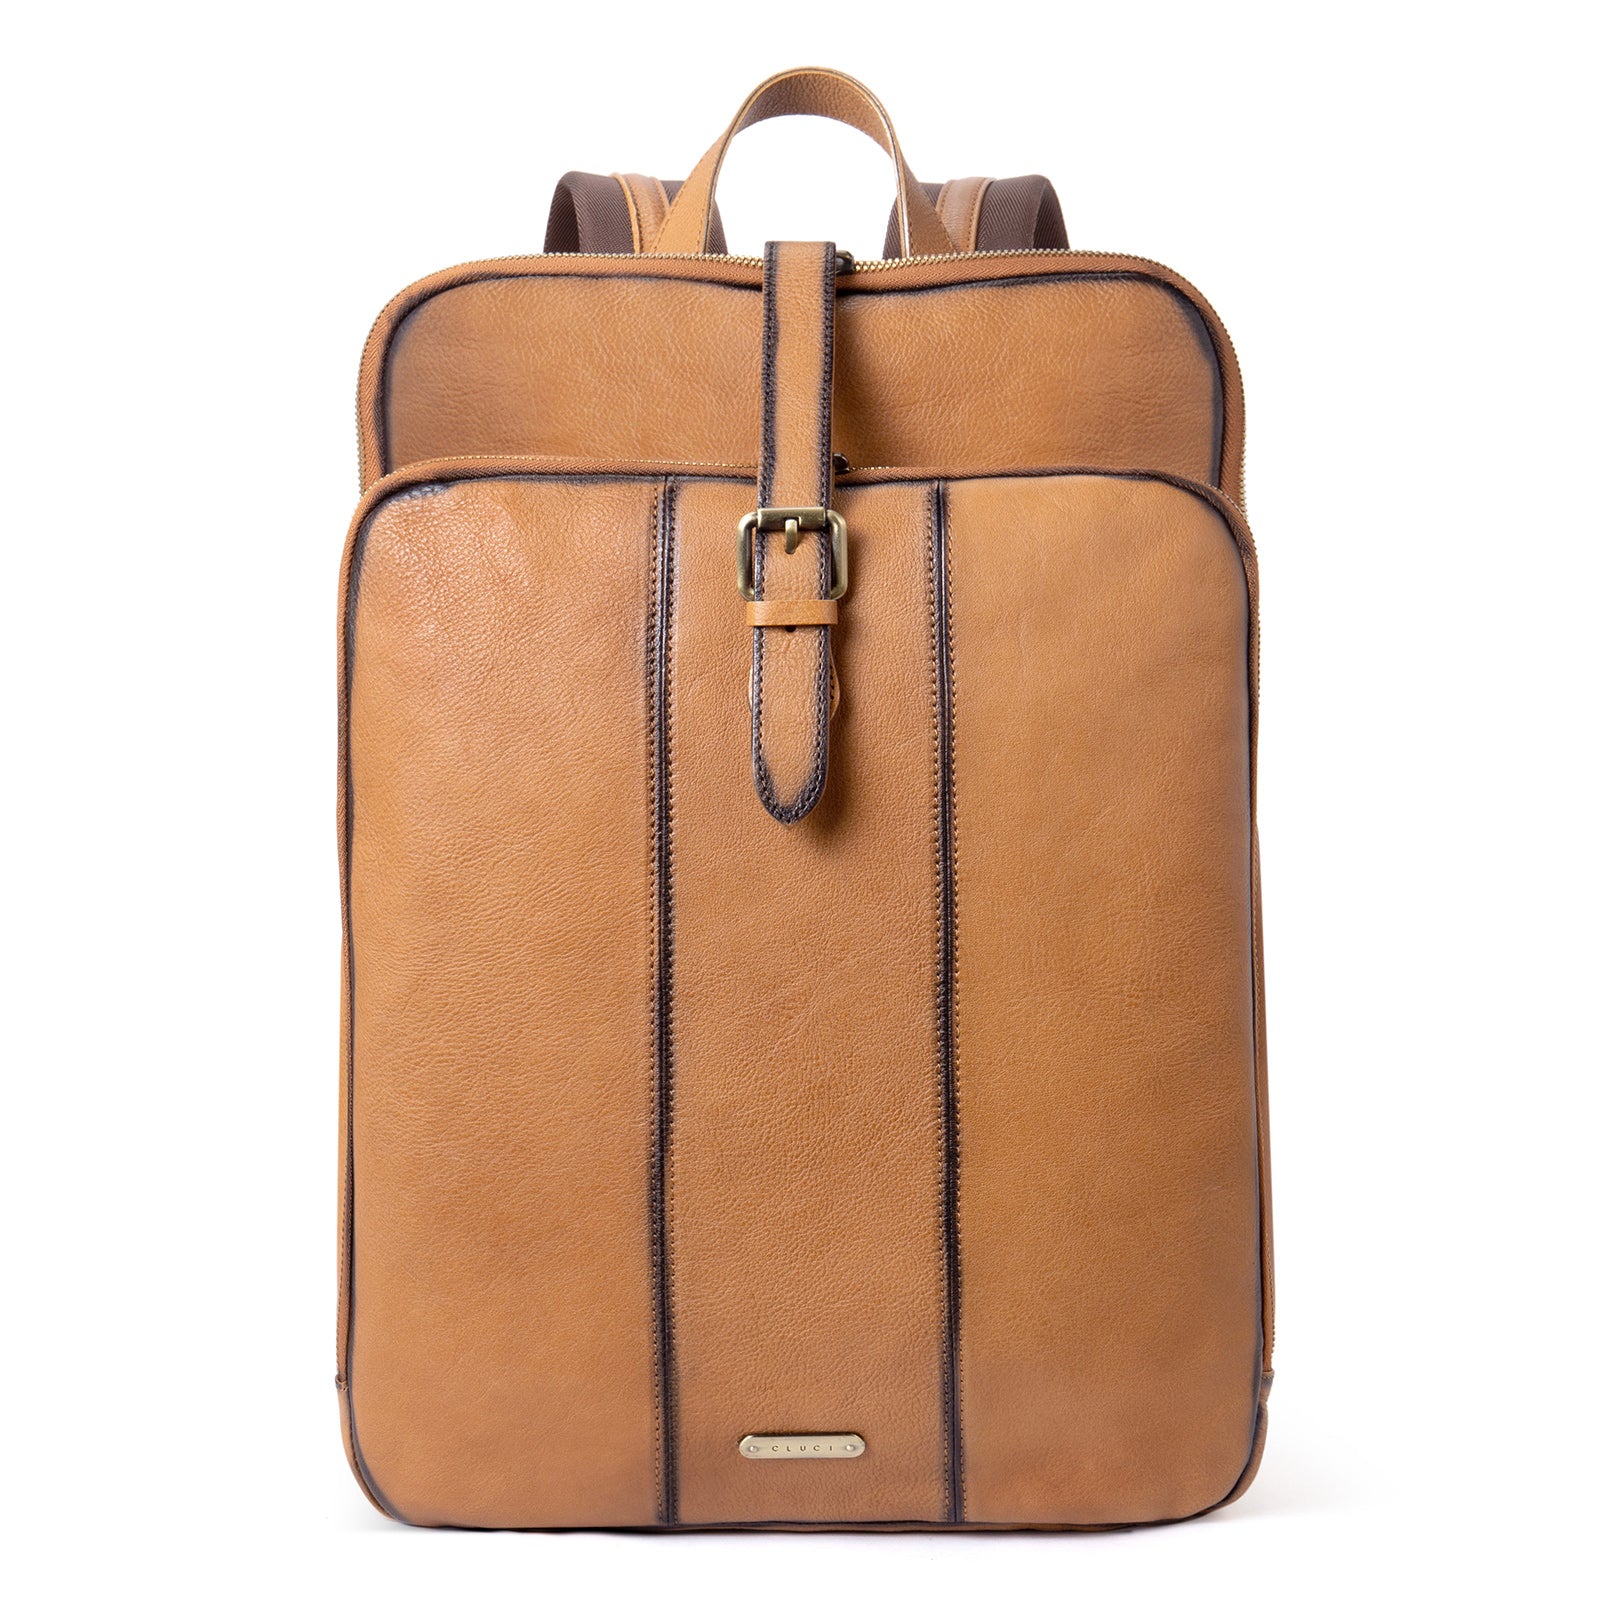 CLUCI Leather Laptop Backpack for Women Vegetable Tanned Full Grain Leather 15.6 inch Computer Bag Travel Business Daypack